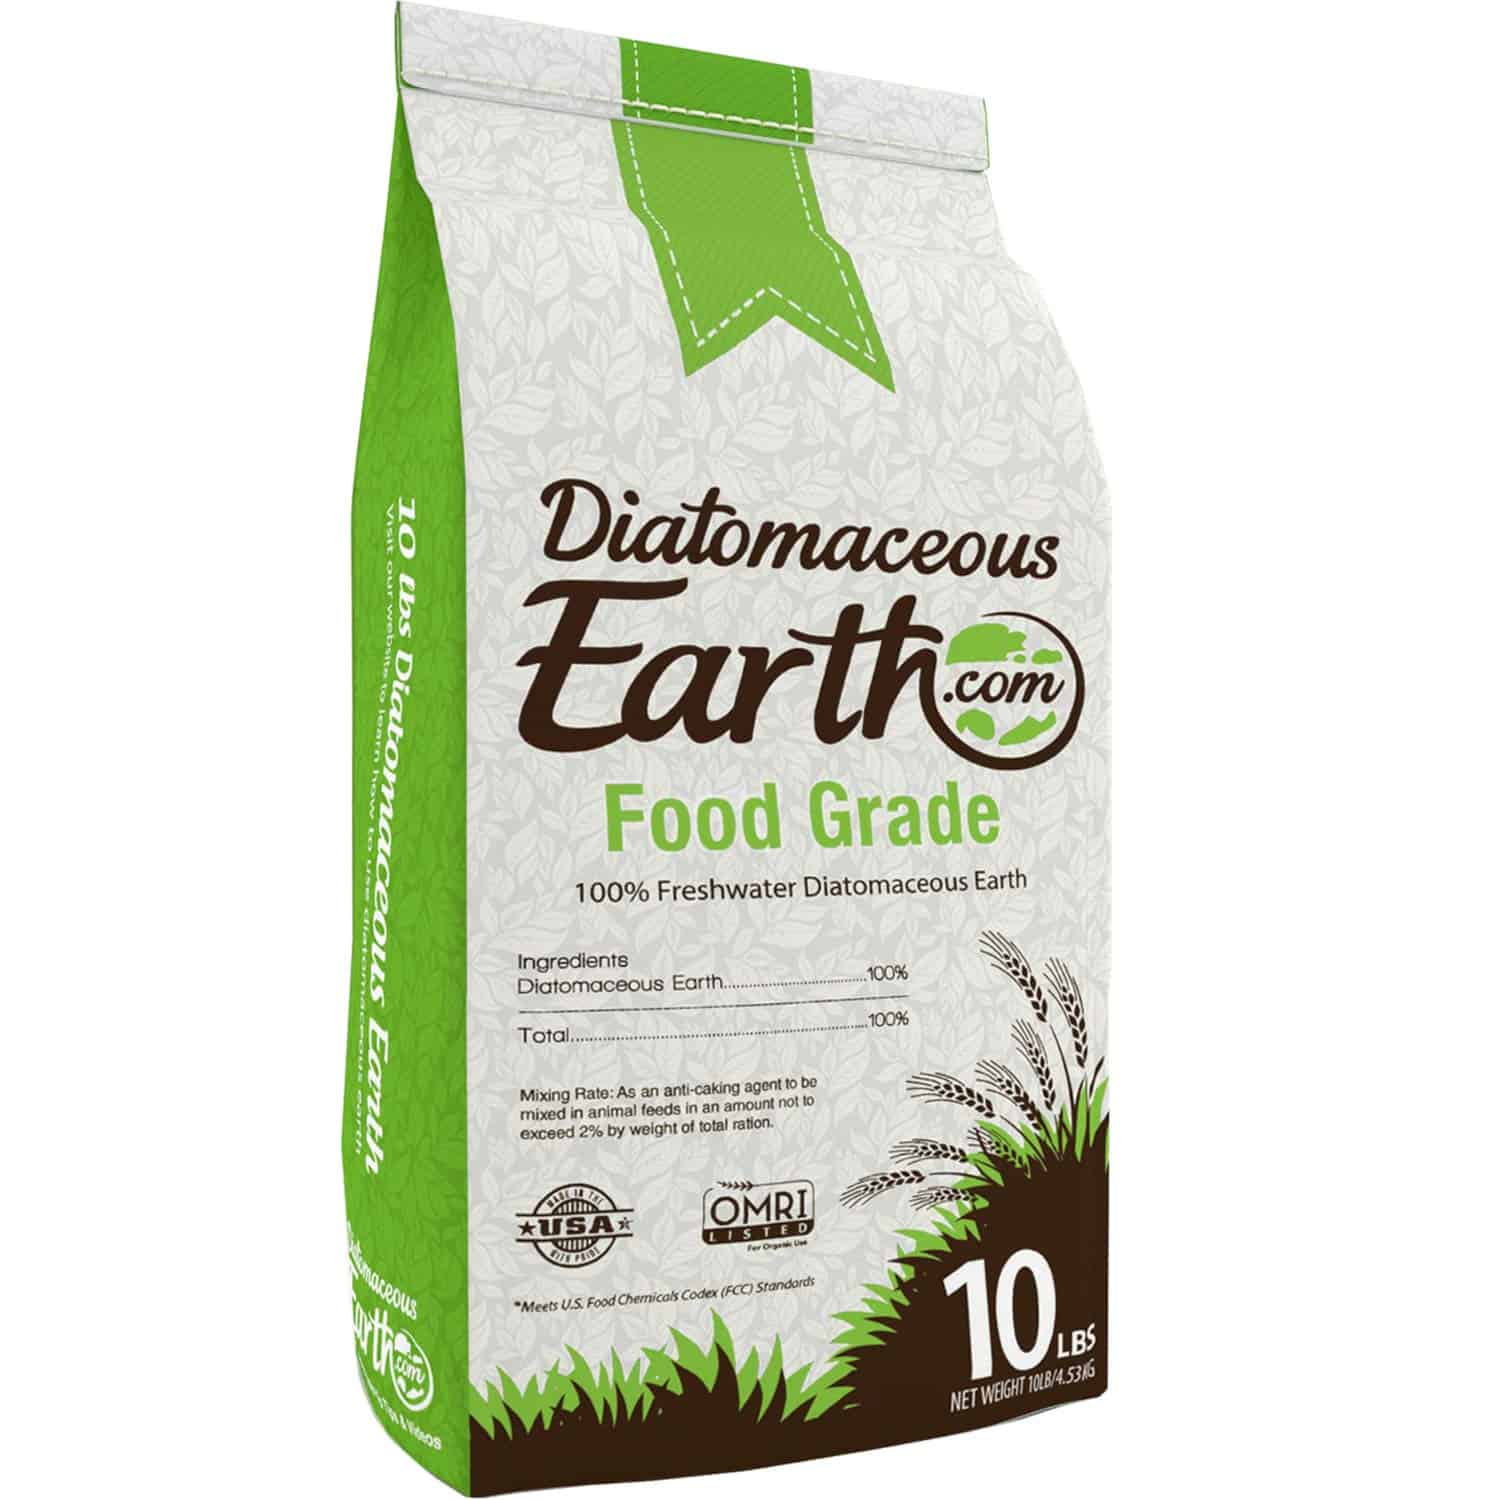 DiatomaceousEarth DE10 Food Grade - Best To Kill Spider Mites